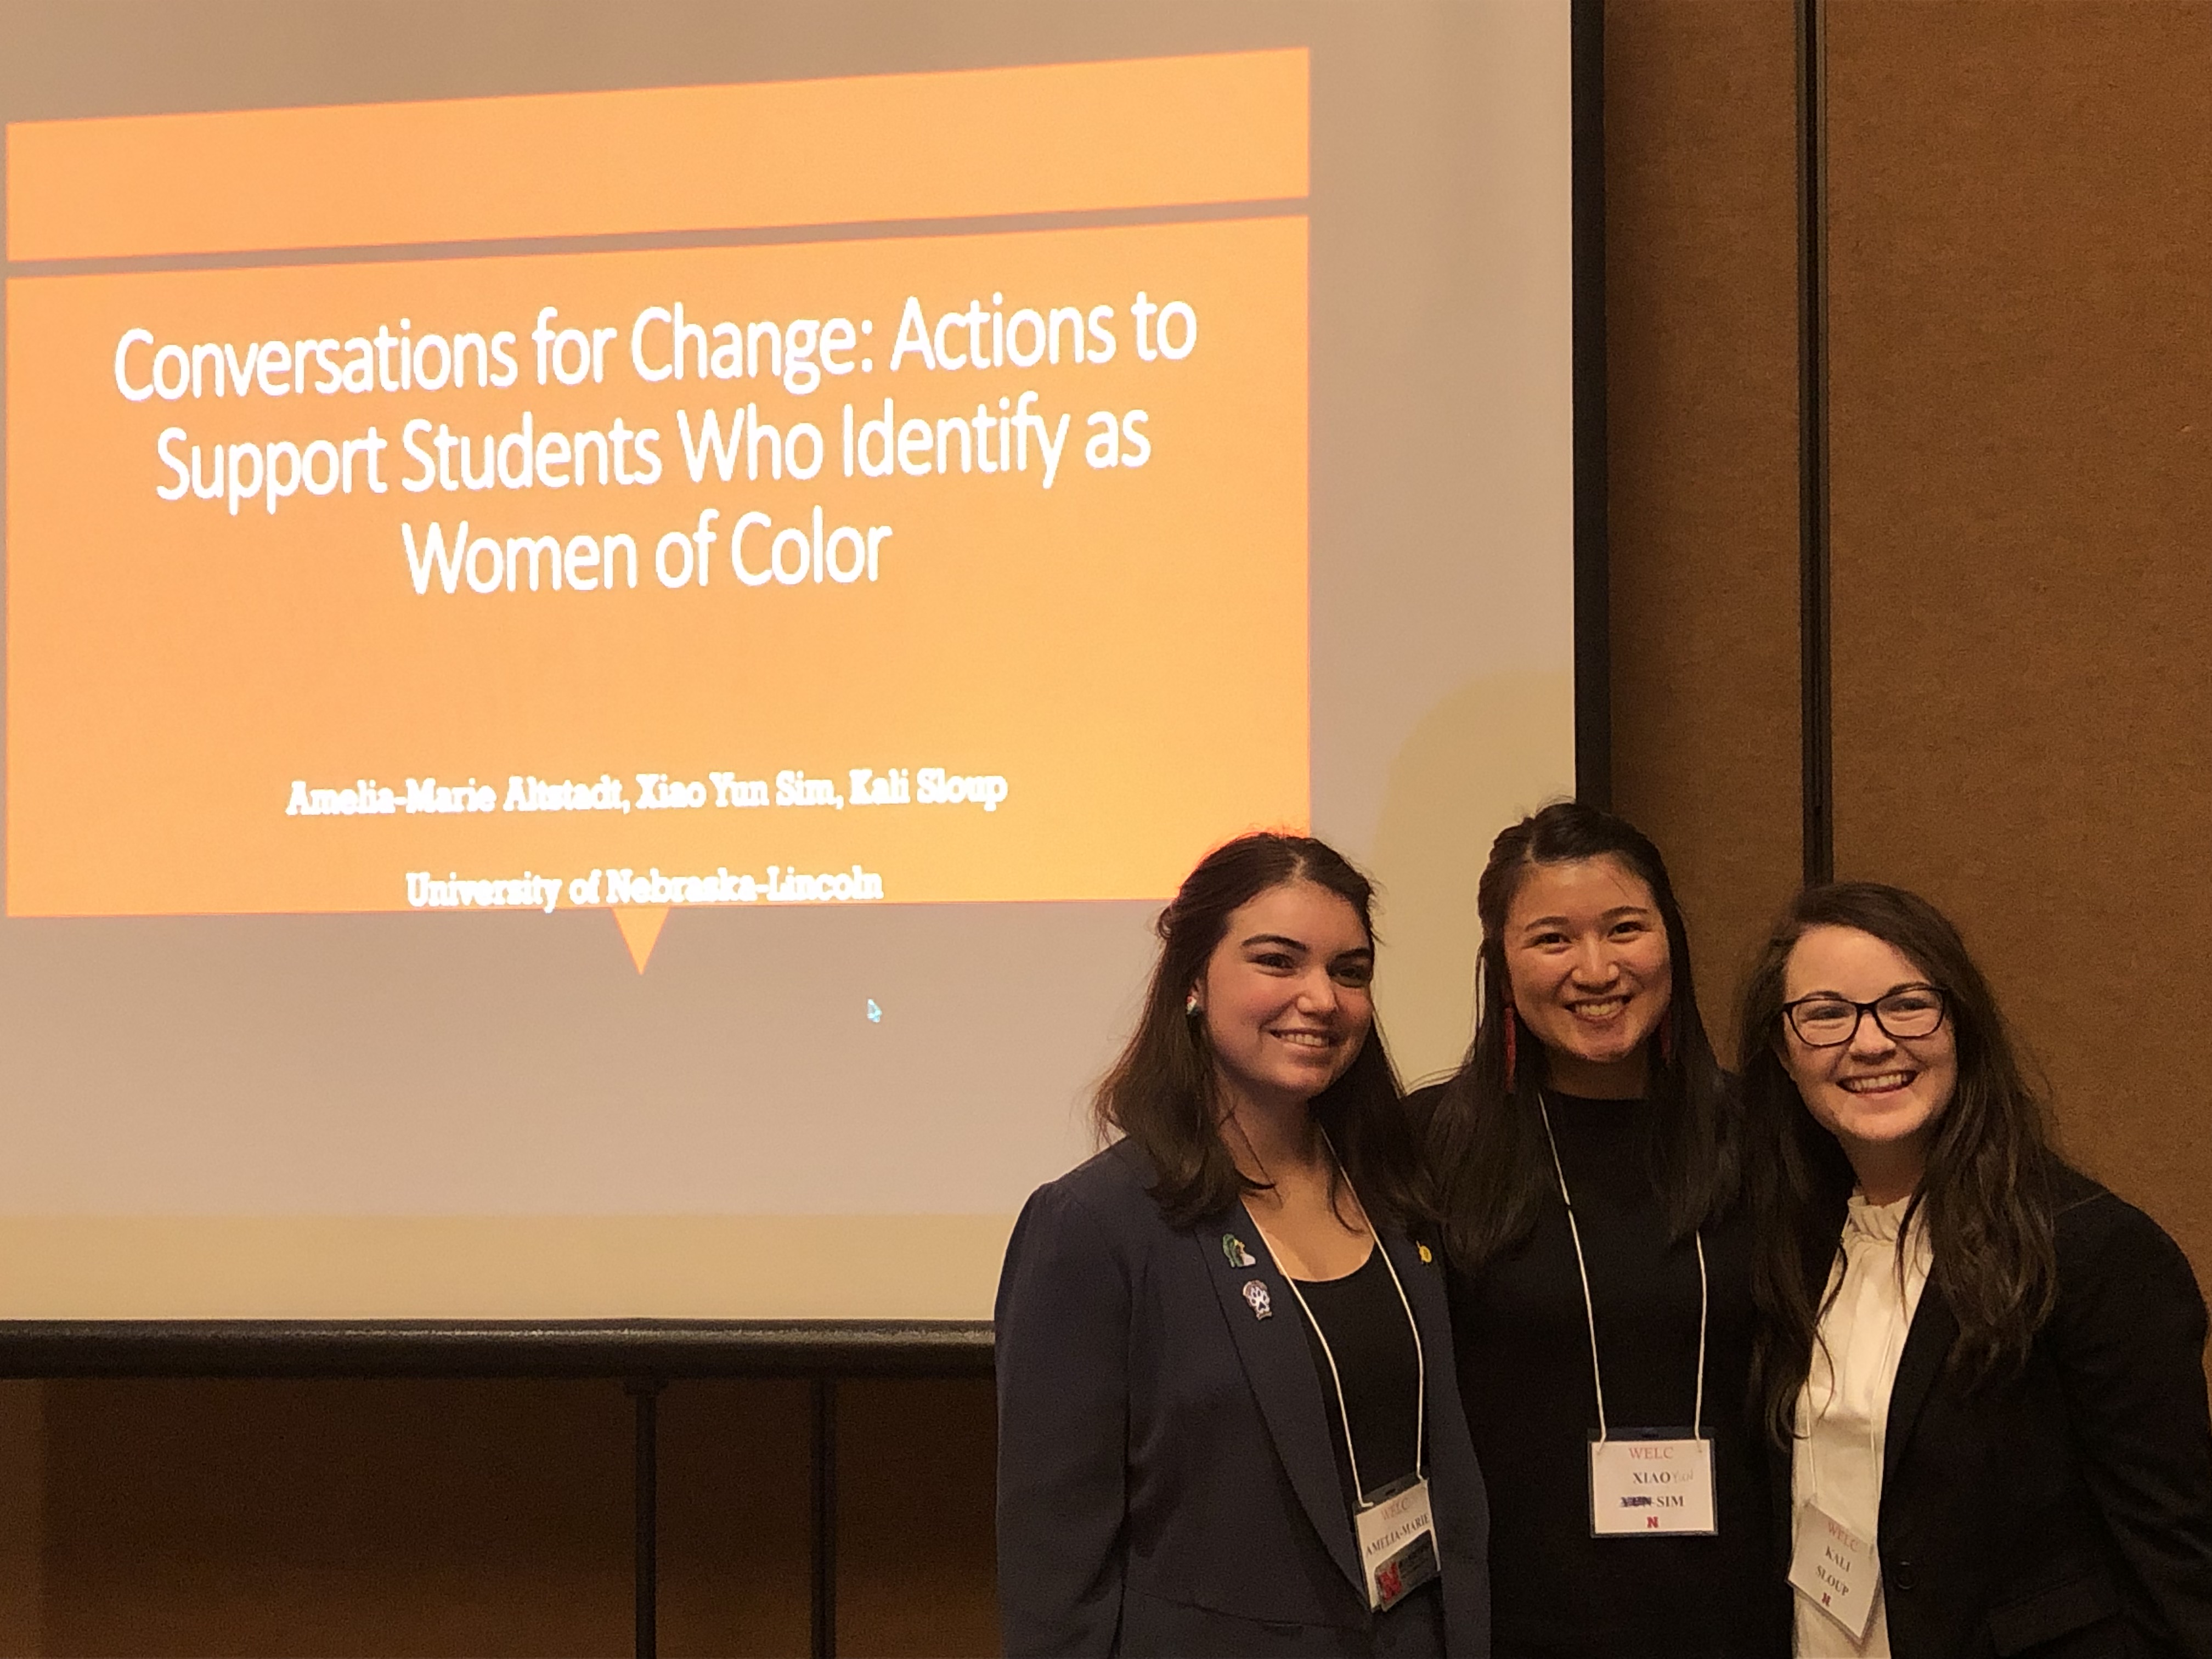 Xiao Yun and her two cohort mates, Kali and Amelia-Marie presented at a conference in their first year of graduate school.